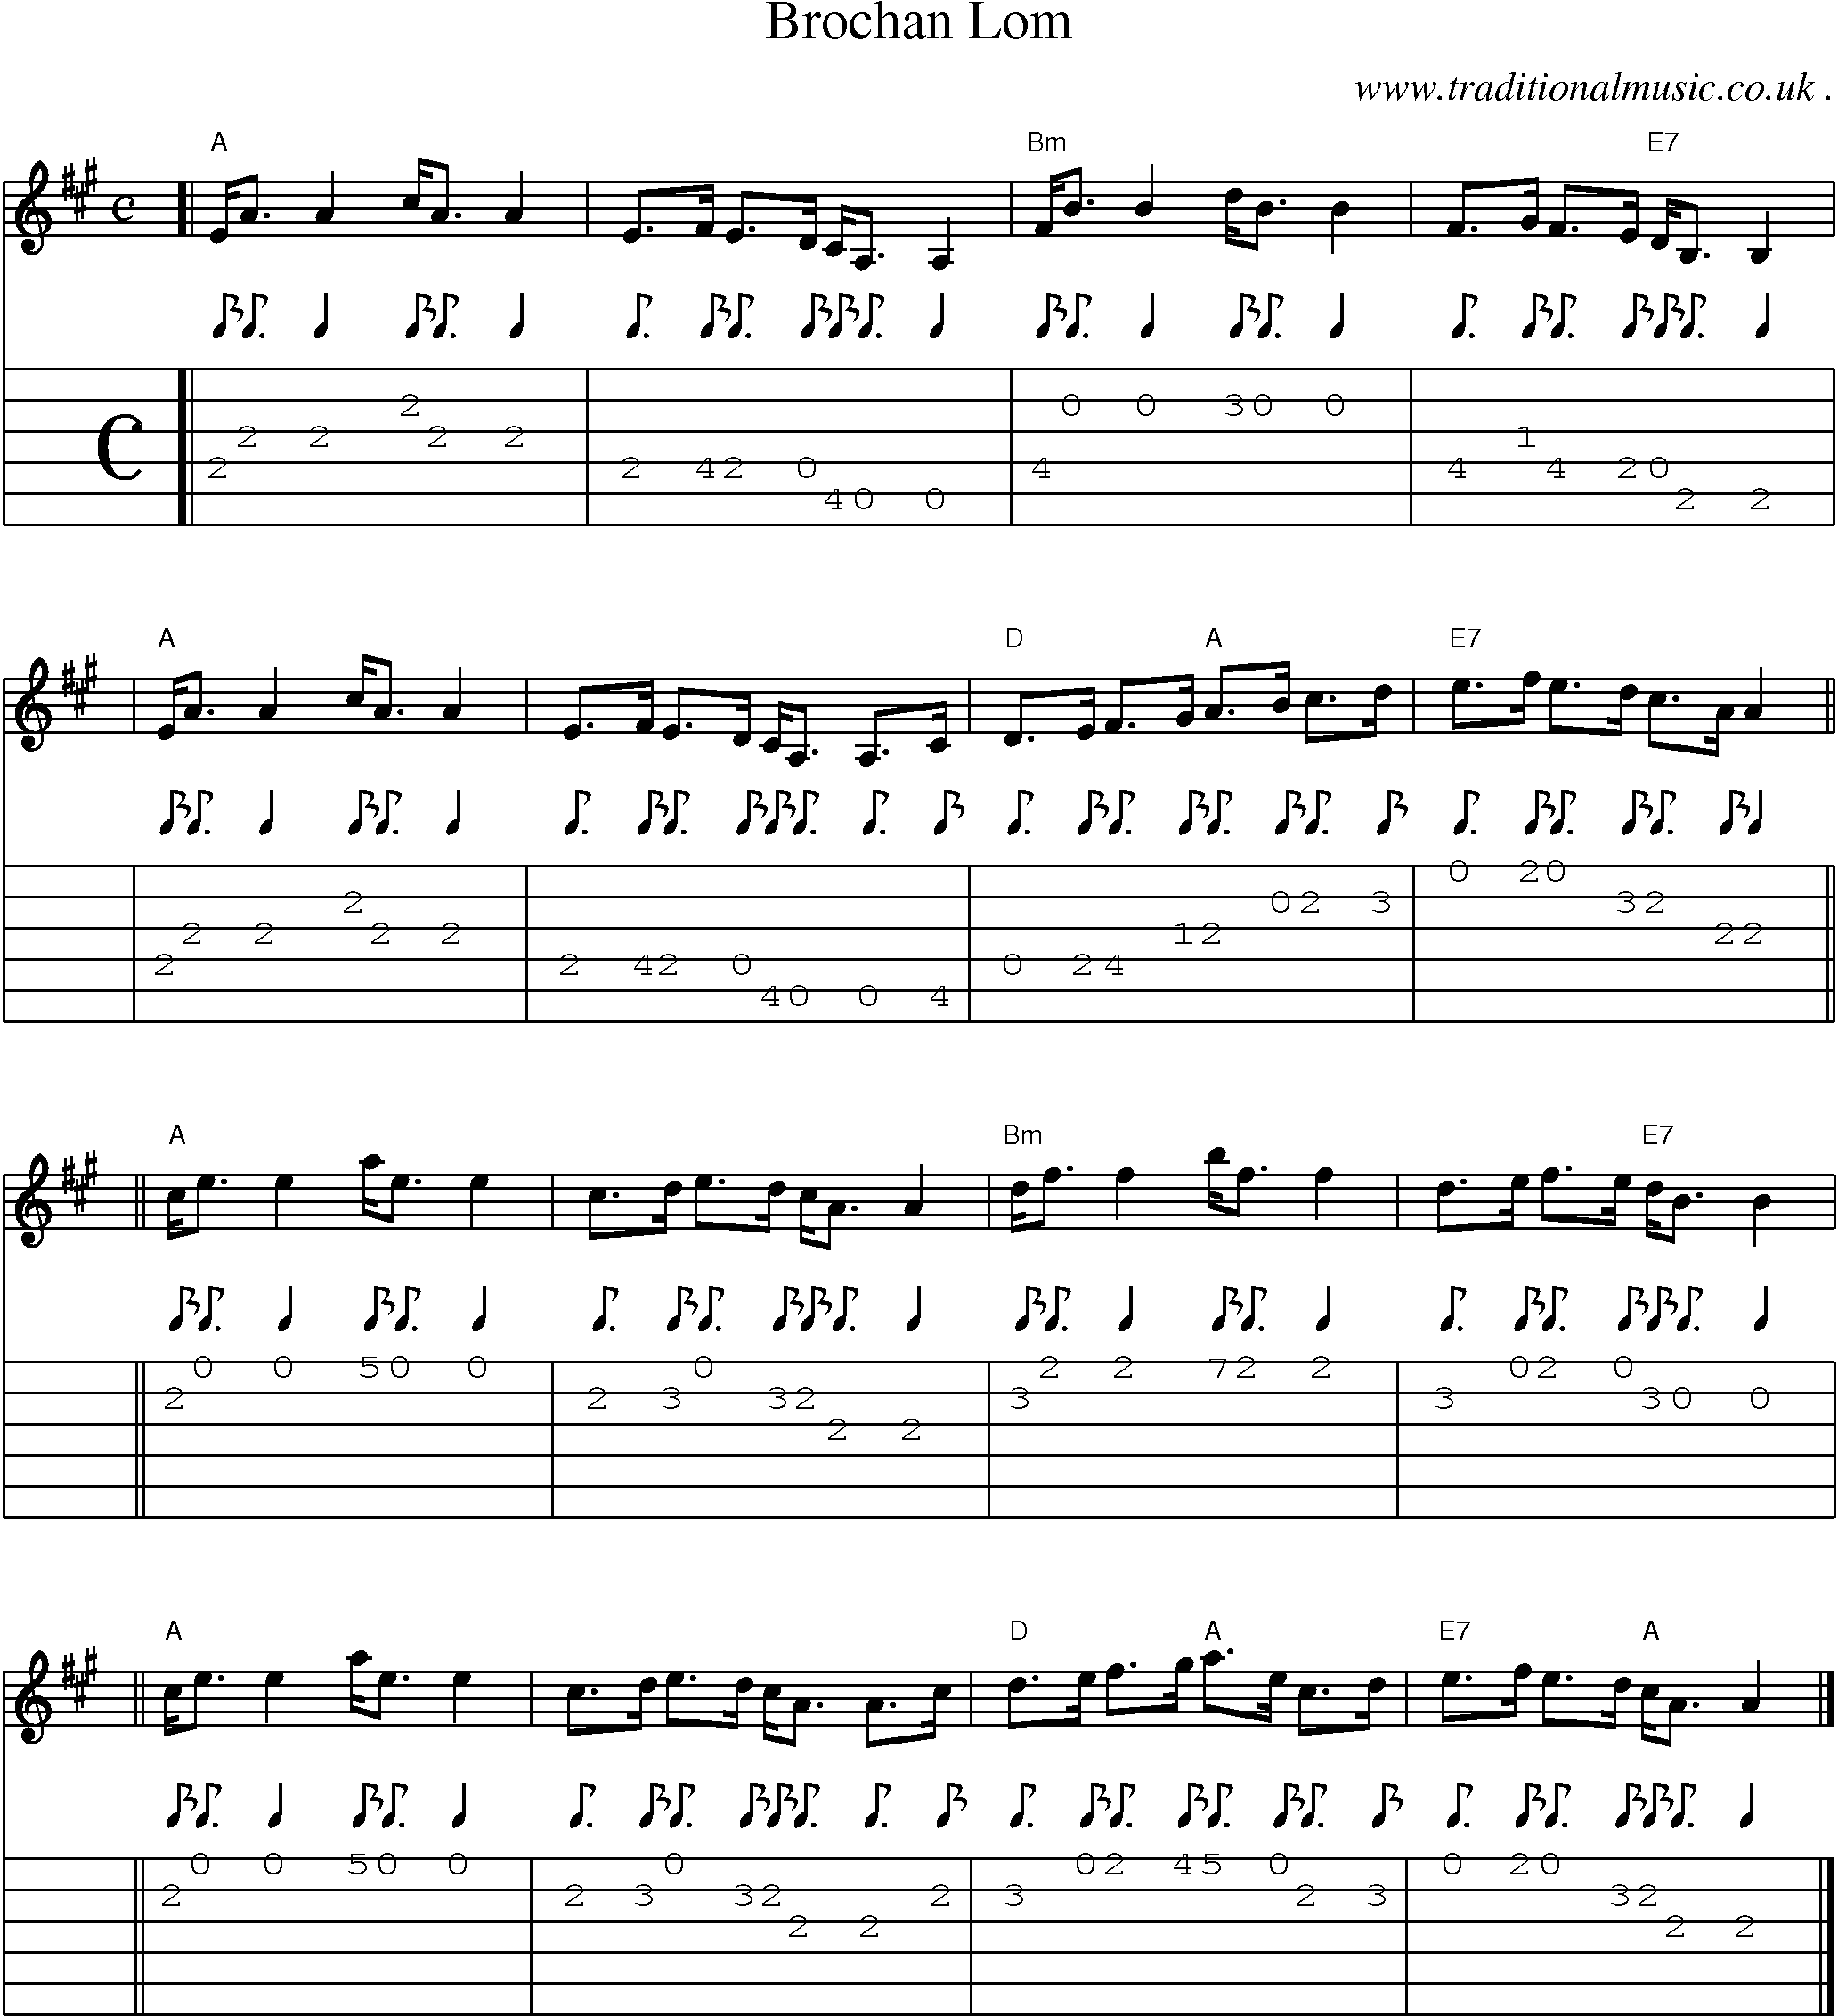 Sheet-music  score, Chords and Guitar Tabs for Brochan Lom